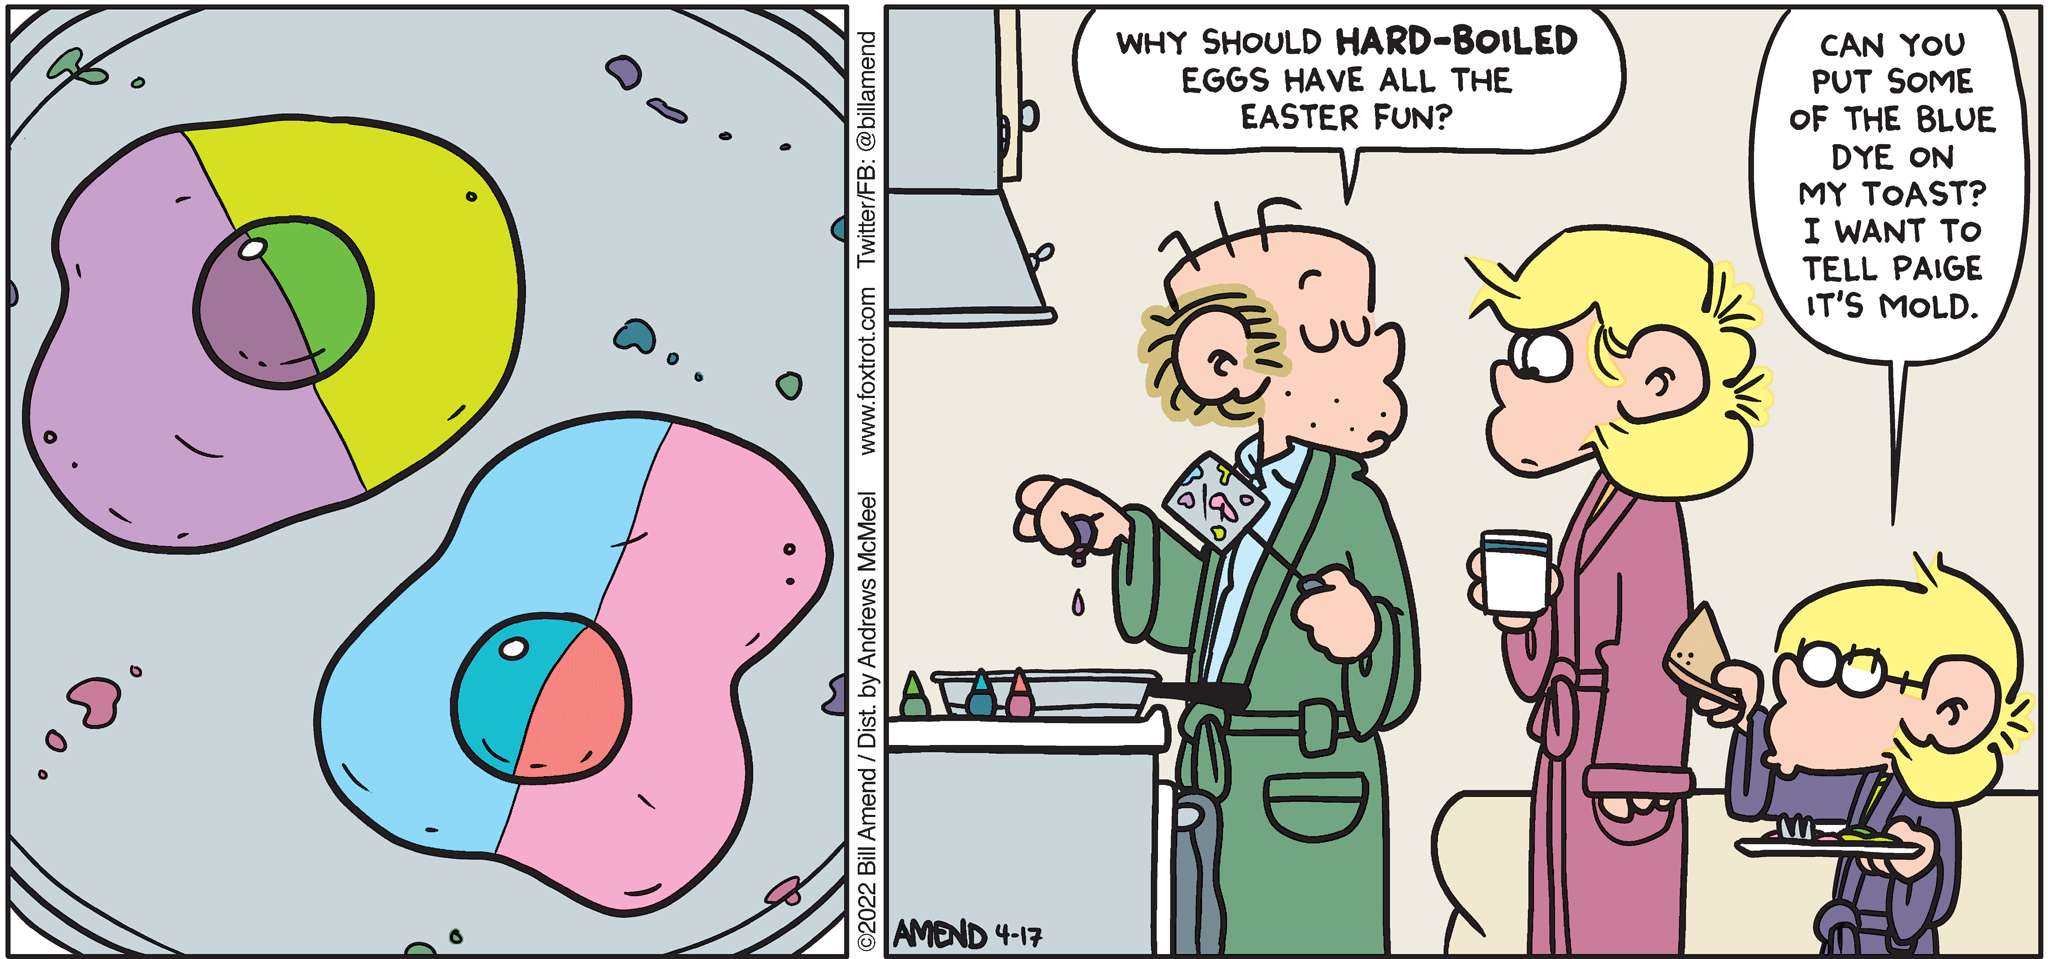 FoxTrot comic strip by Bill Amend - "Dye Harder" published April 17, 2022 - Transcript: Roger Fox: Why should hard-boiled eggs have all the Easter fun? Jason Fox: Can you put some of the blue dye on my toast? I want to tell Paige it's mold.